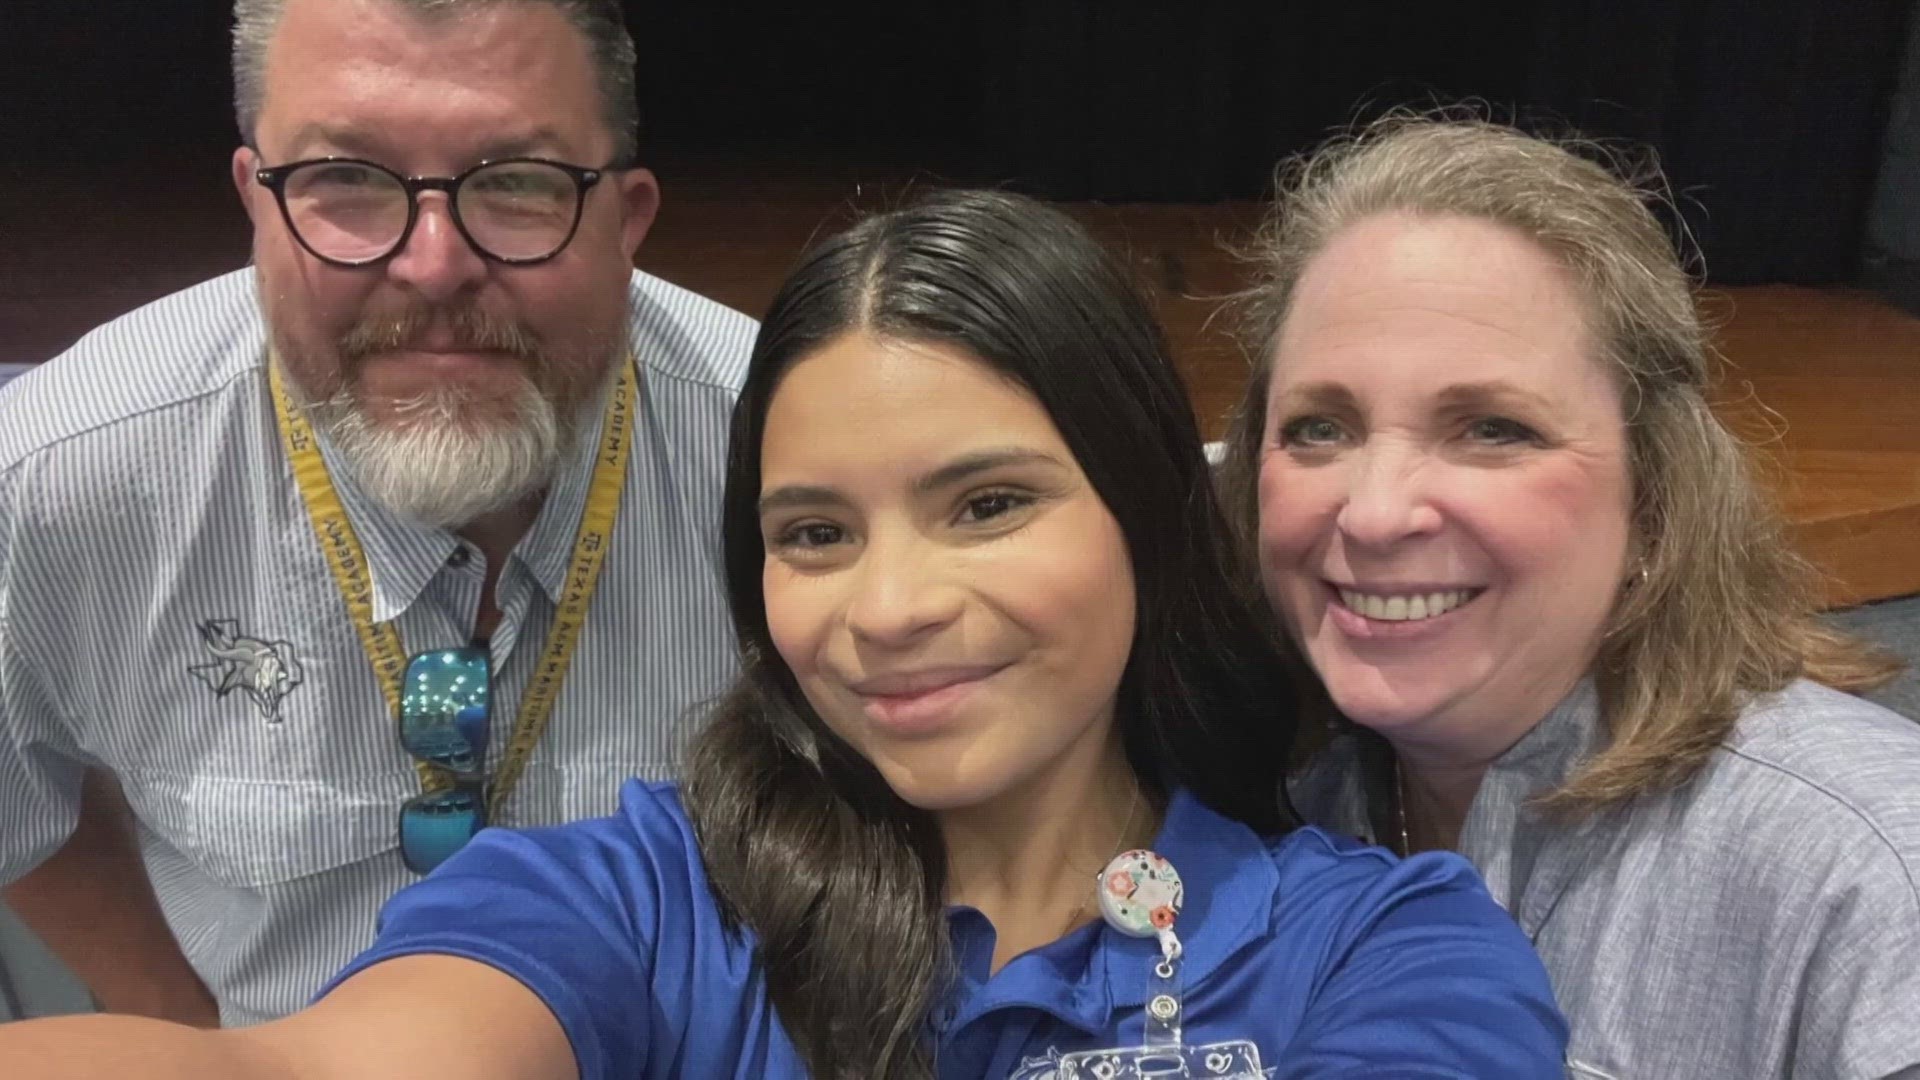 Mallorie Gonzales, a Bryan ISD staff member, has struggled with a newly developed rare skin disorder called Stevens Johnson Syndrome.